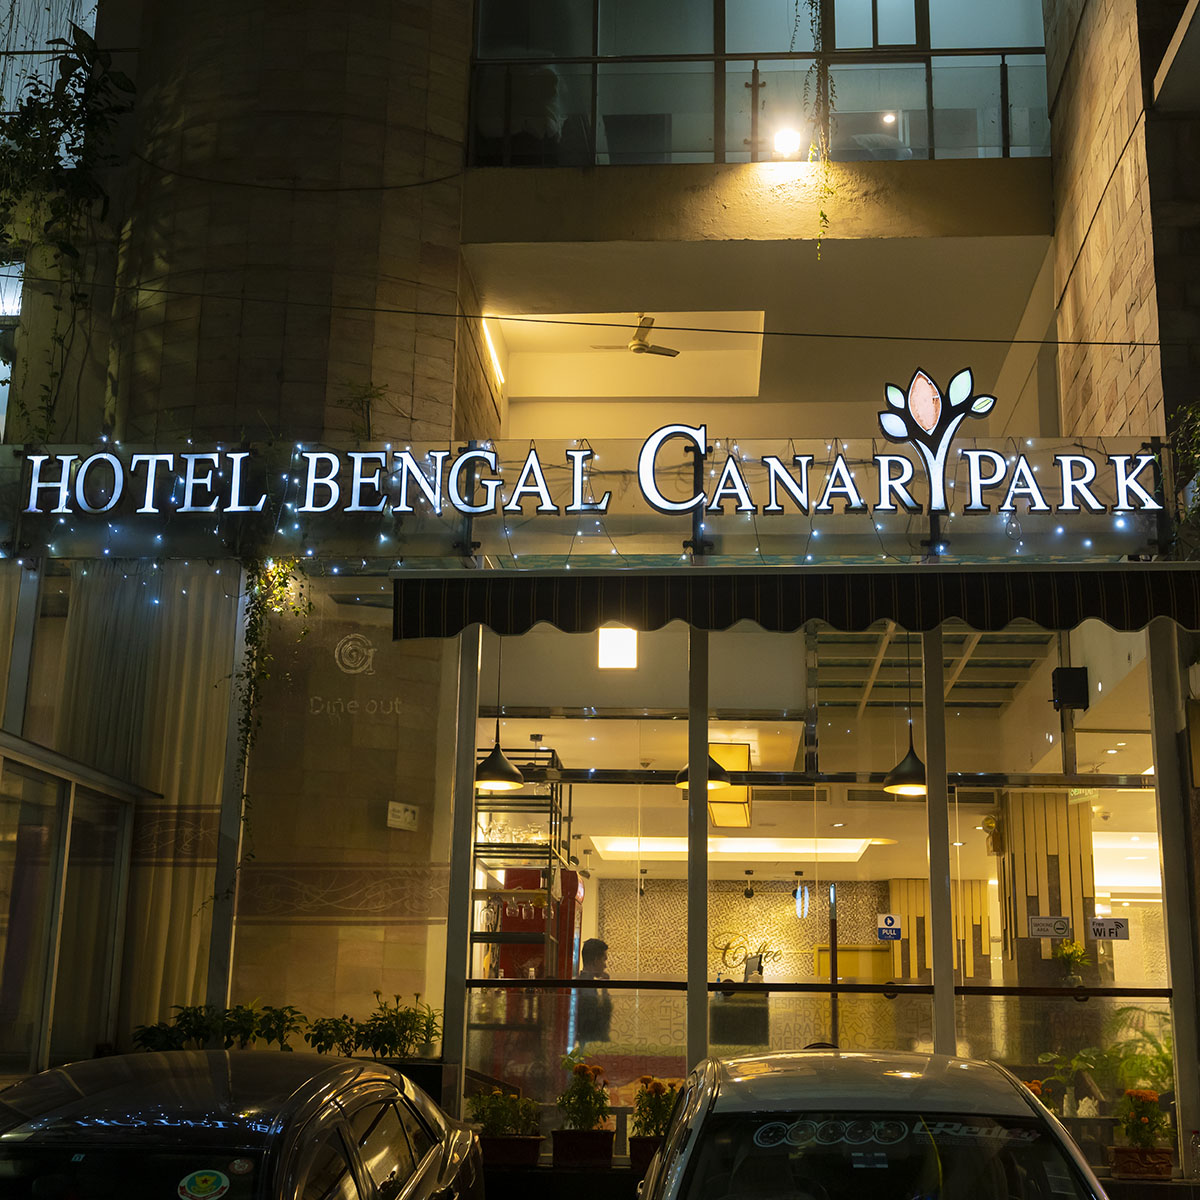 Hotel Bengal Canary Park image